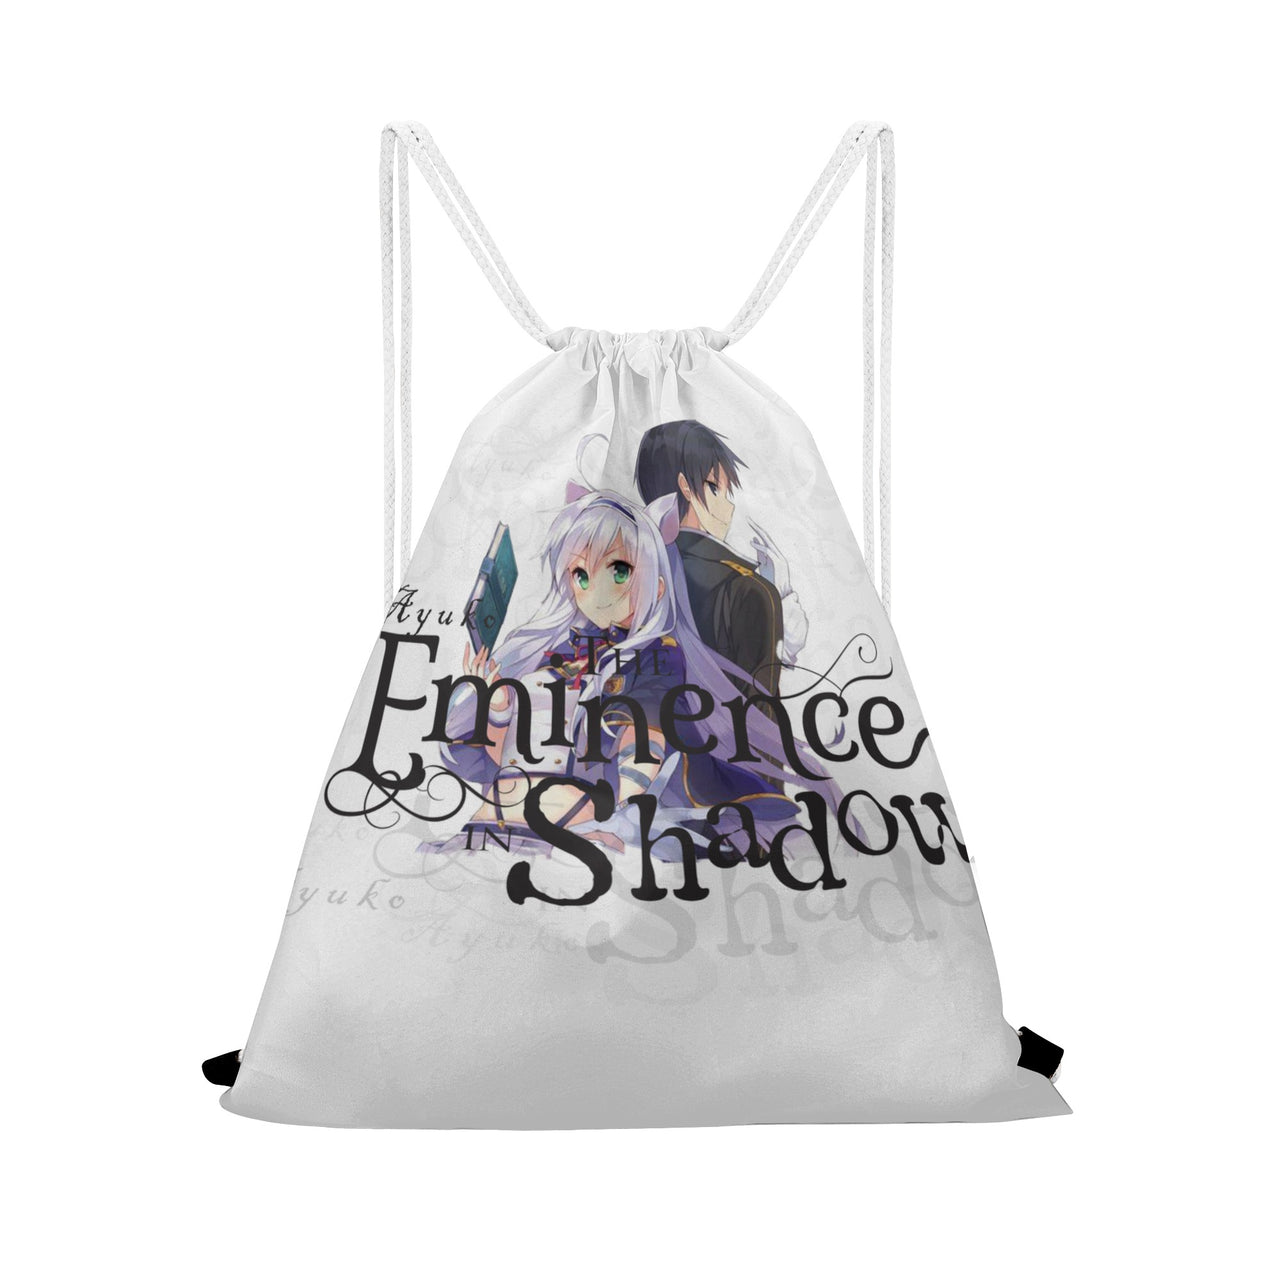 Borsa con coulisse Anime Eminence in Shadow